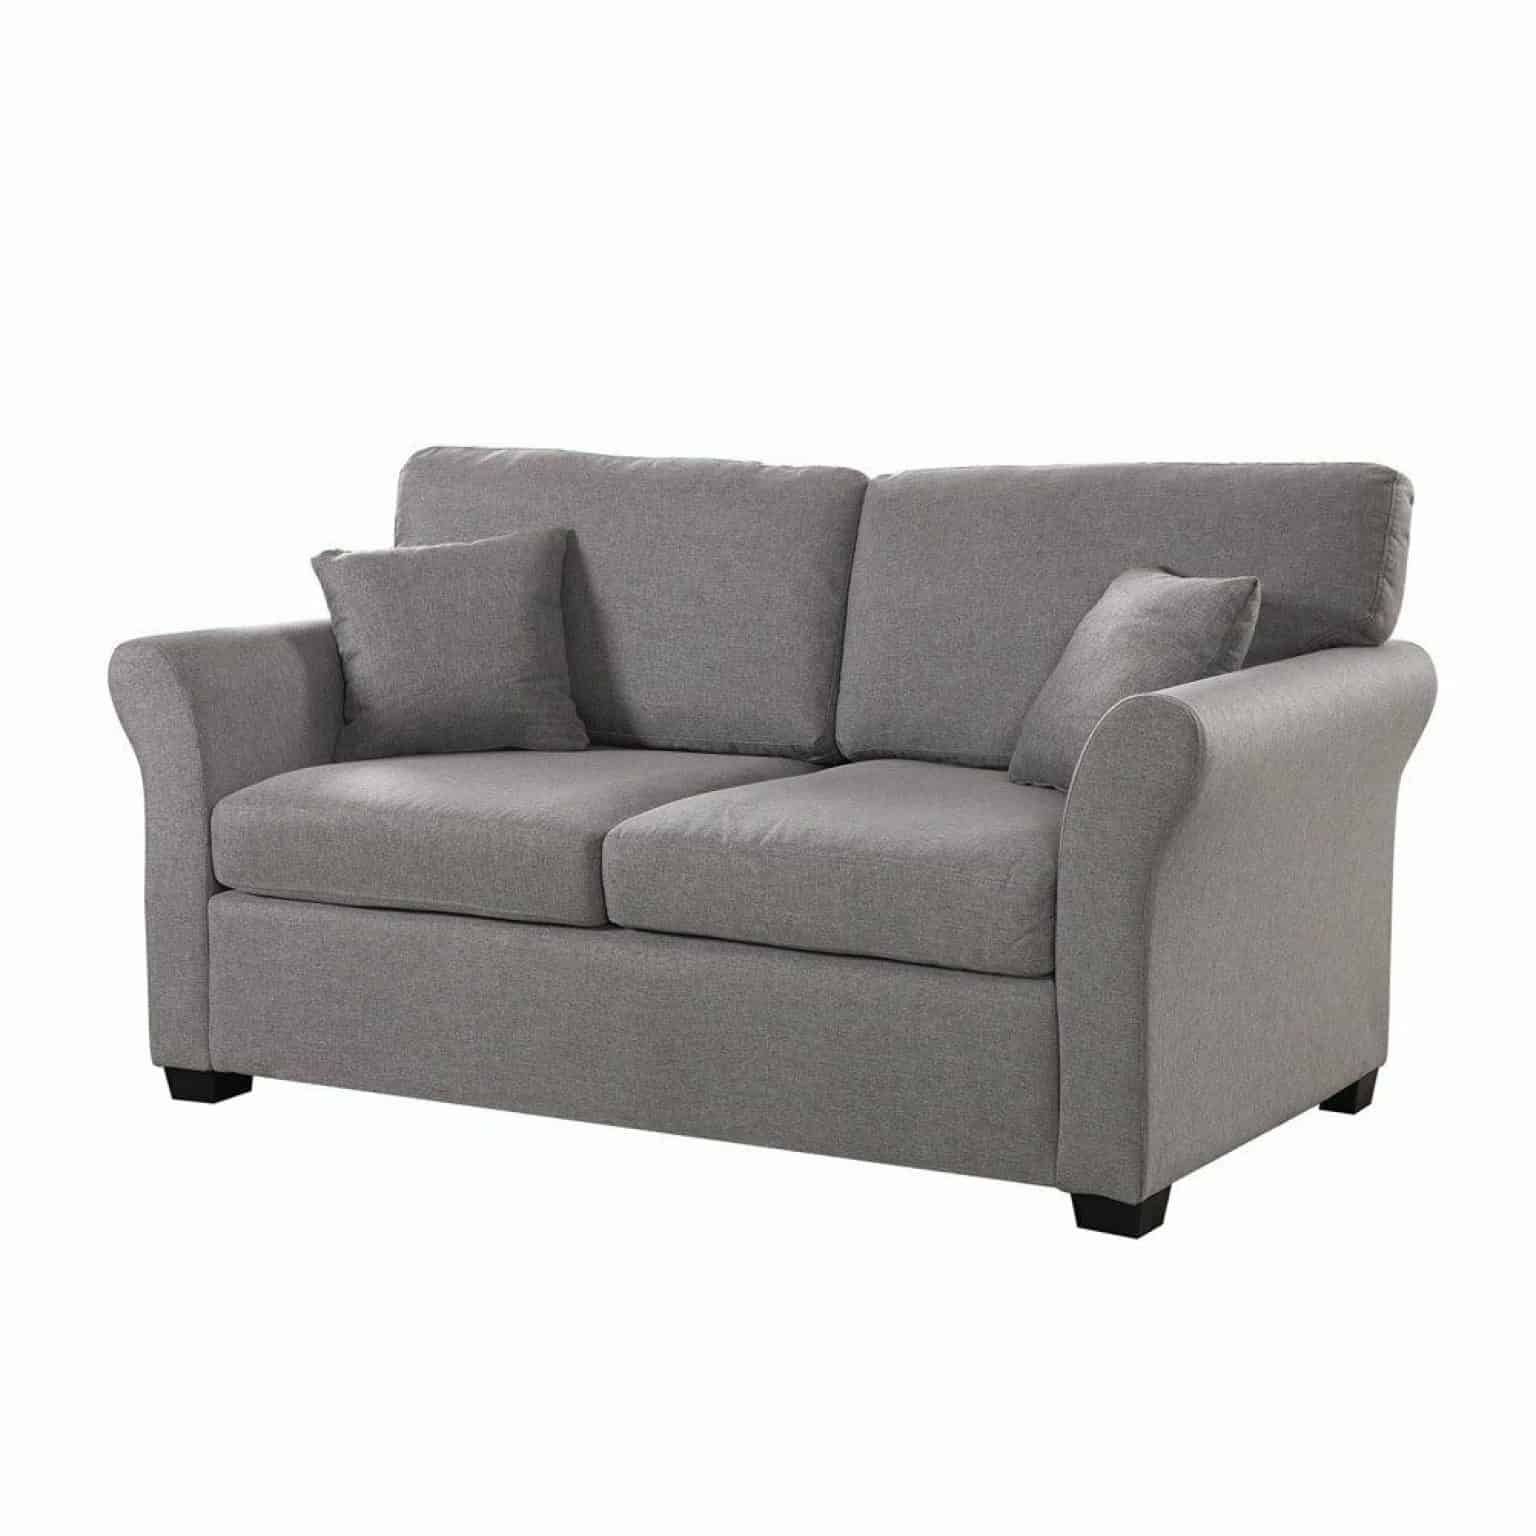 63" Bluish Grey Cozy Loveseat Sofa W/ 2 Accent Pillows – Affordable Inside Most Current Sofas In Bluish Grey (Photo 4 of 15)